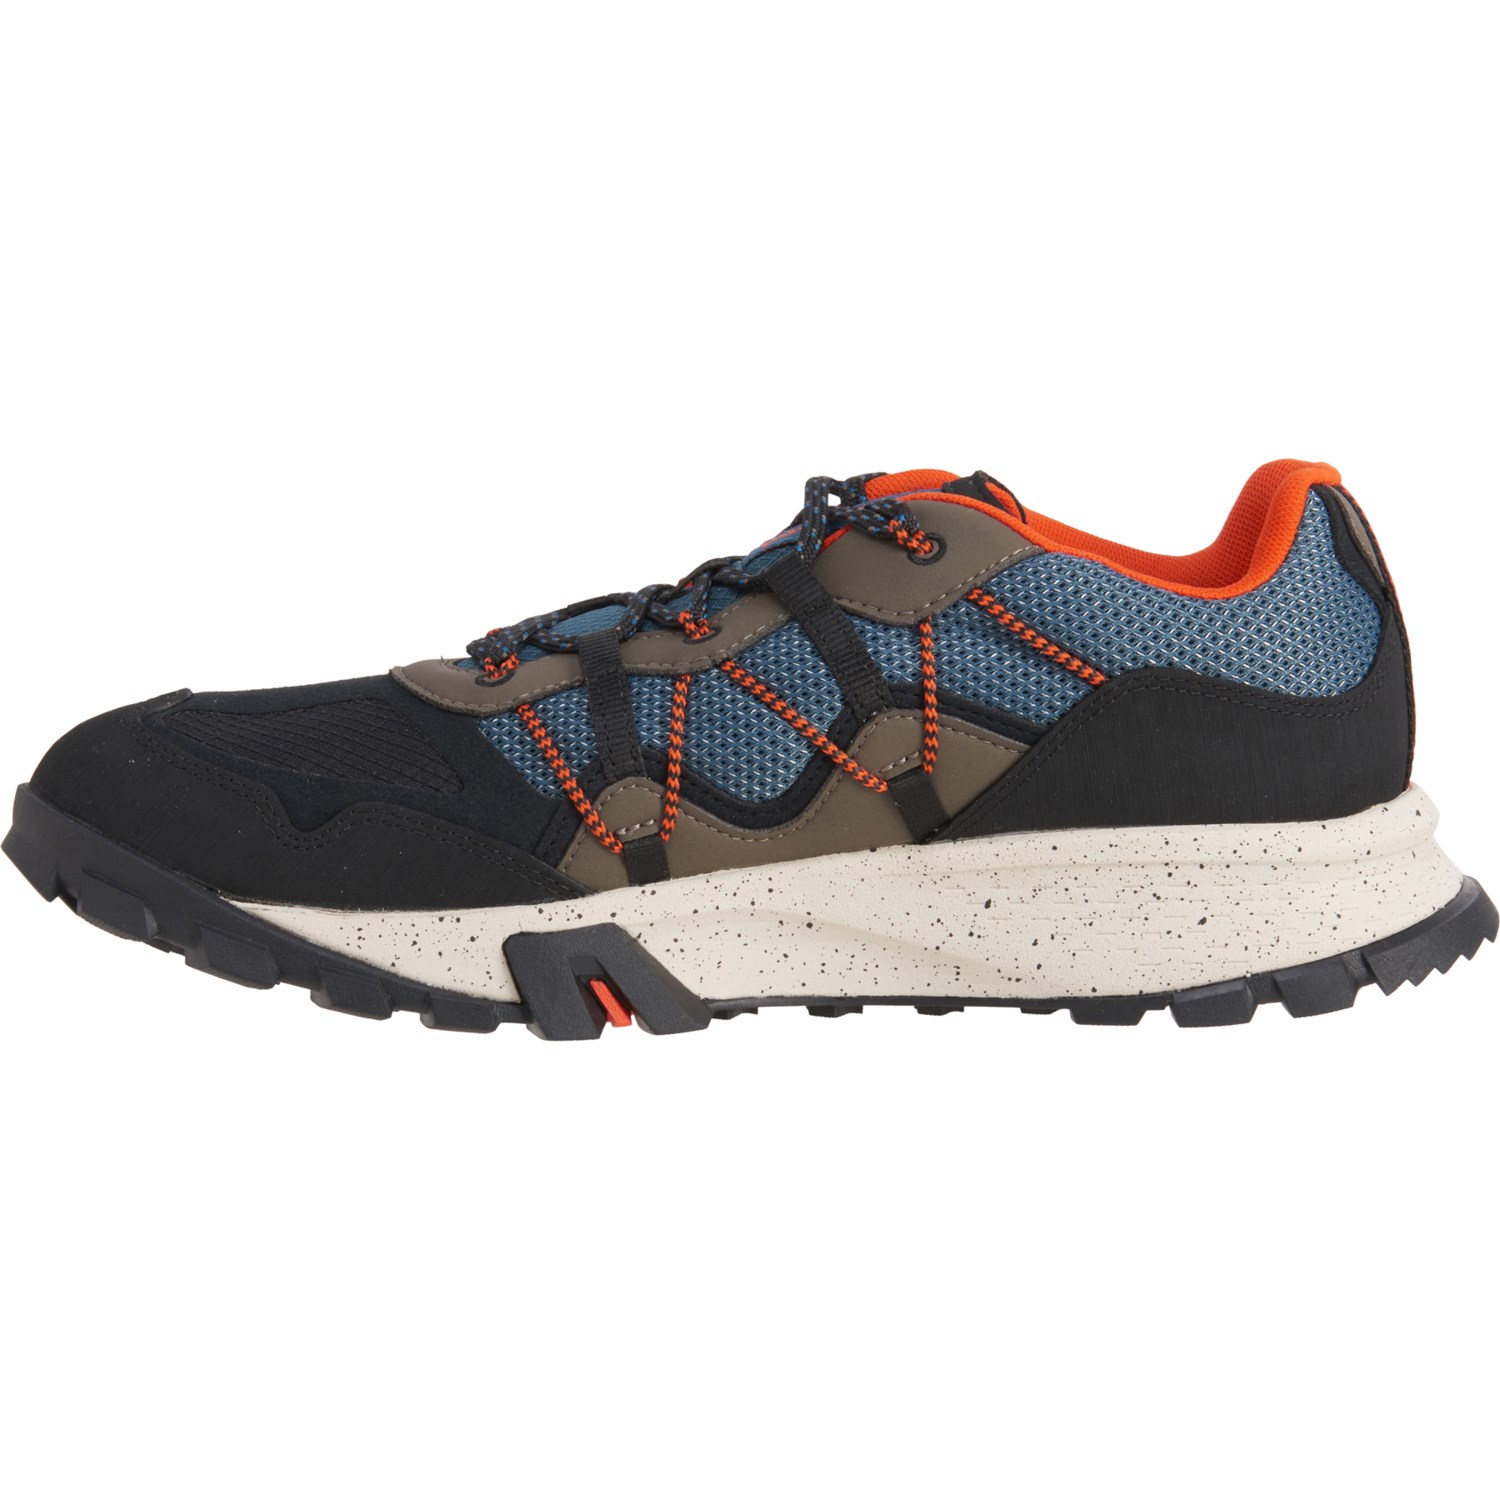 Timberland Garrison Trail Low Hiking Shoes (For Men) - Save 44%